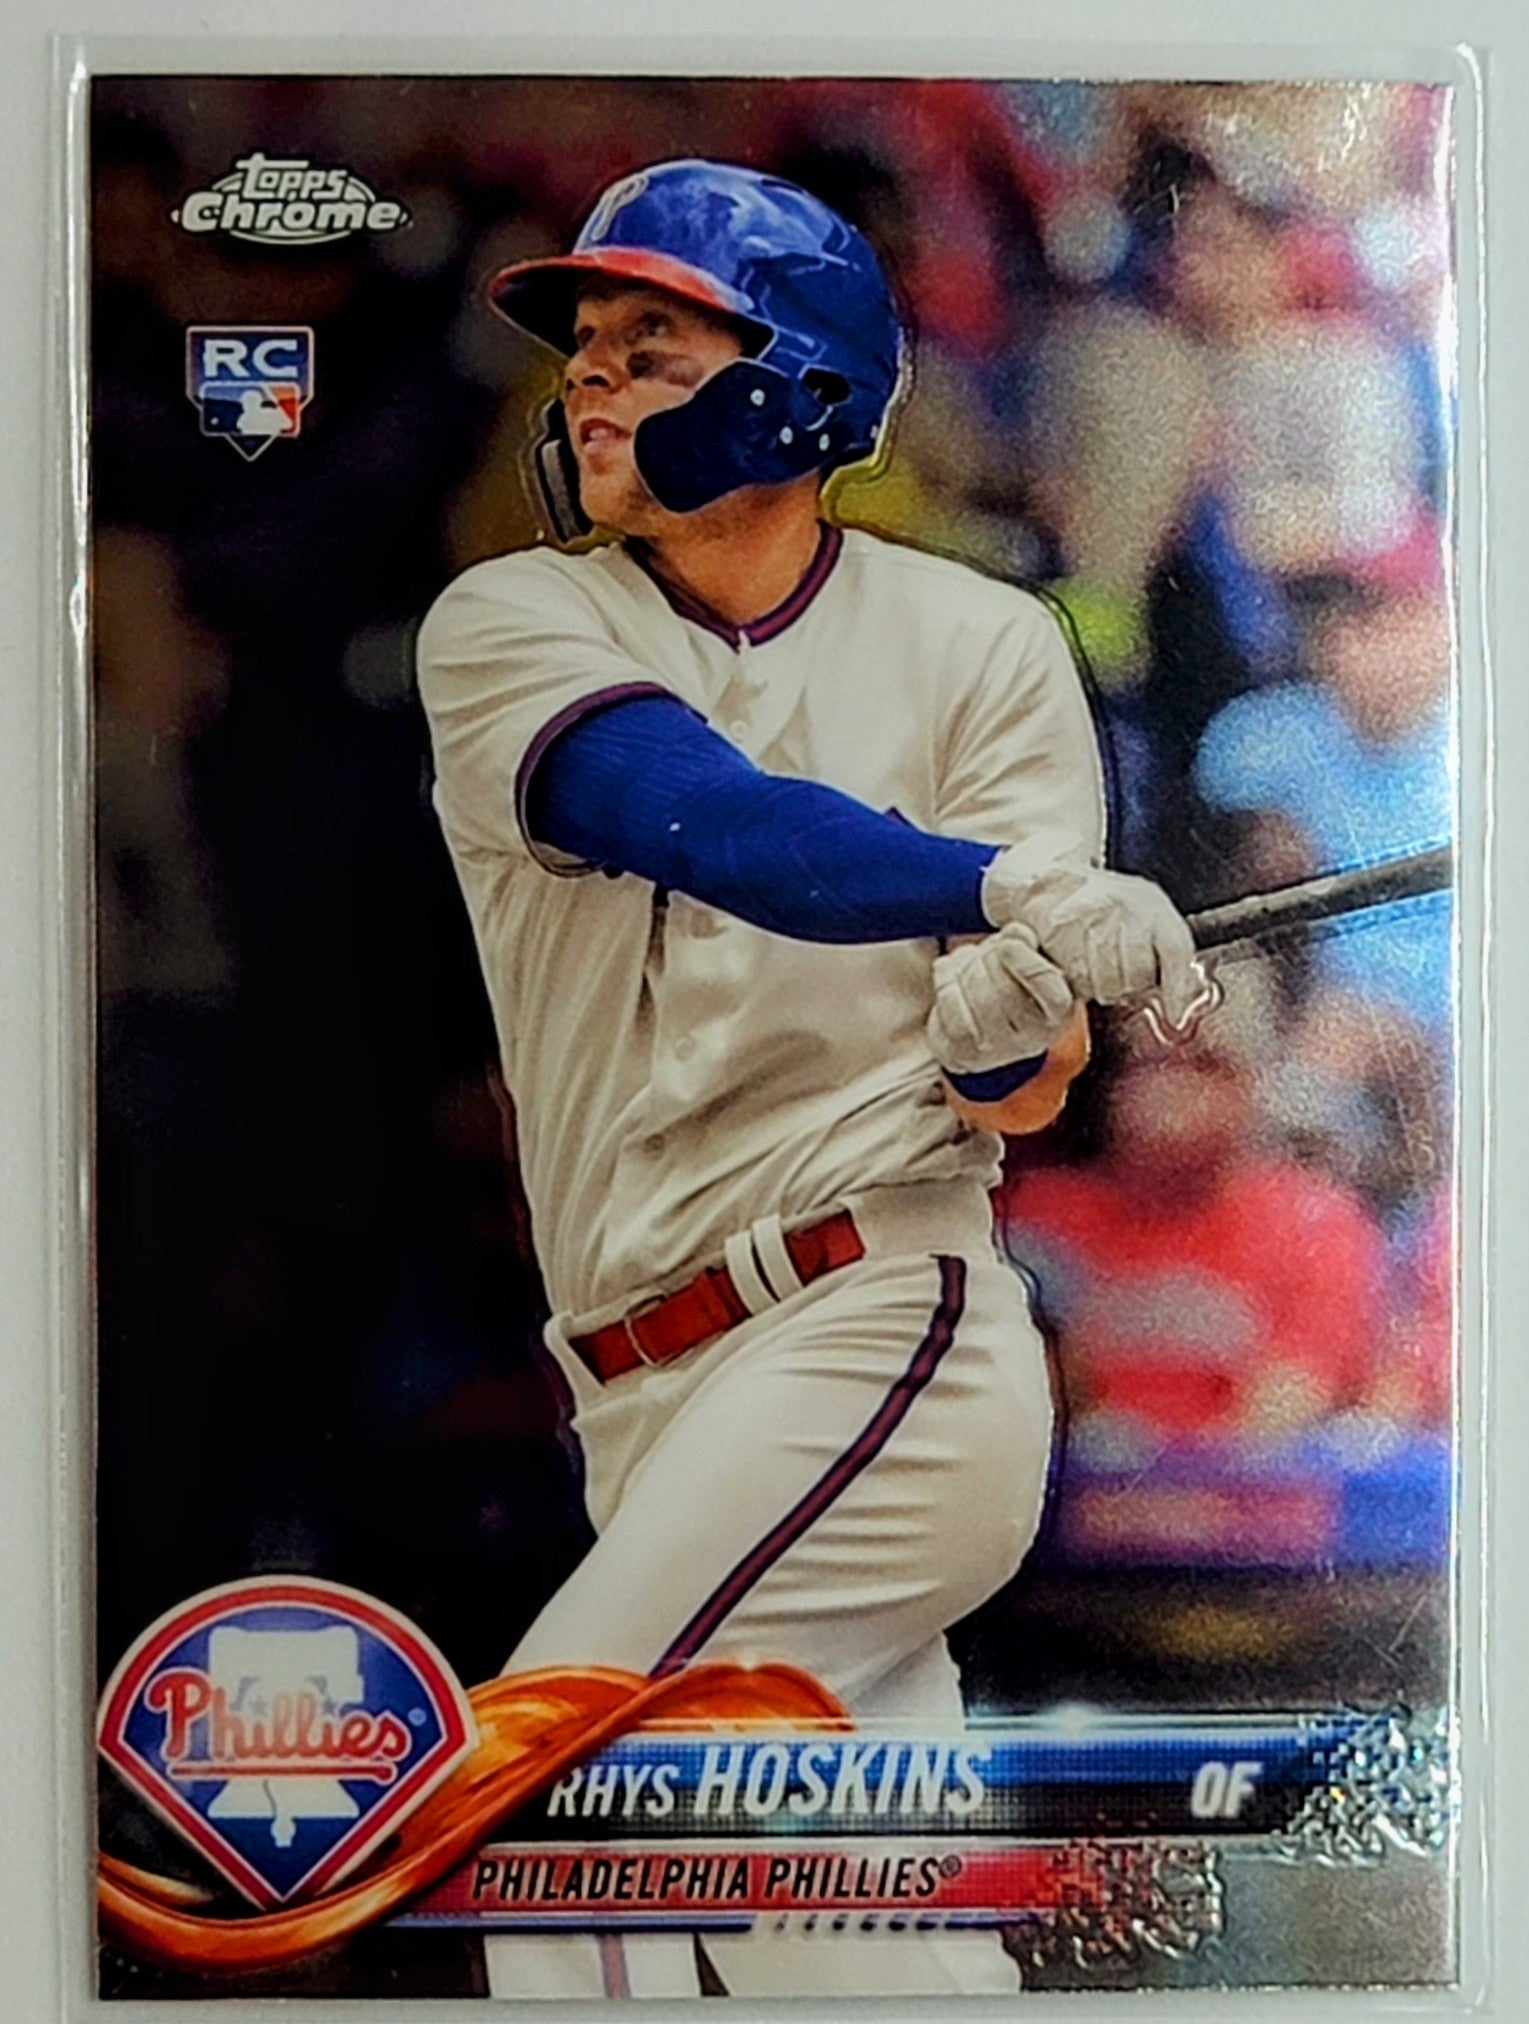 2018 Topps Chrome Update
  Edition Rhys Hoskins
Philadelphia Phillies Baseball Card TH1C4 simple Xclusive Collectibles   